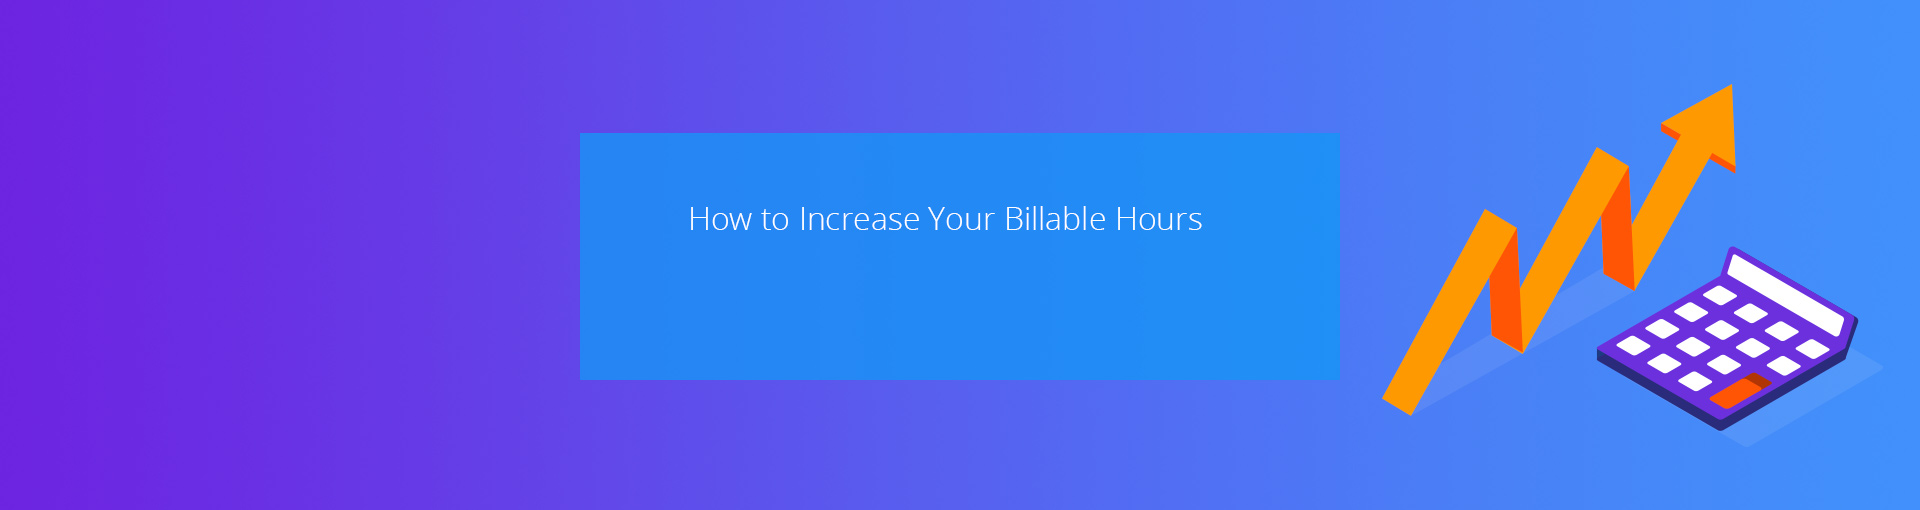 How to Increase Your Billable Hours Featured Image